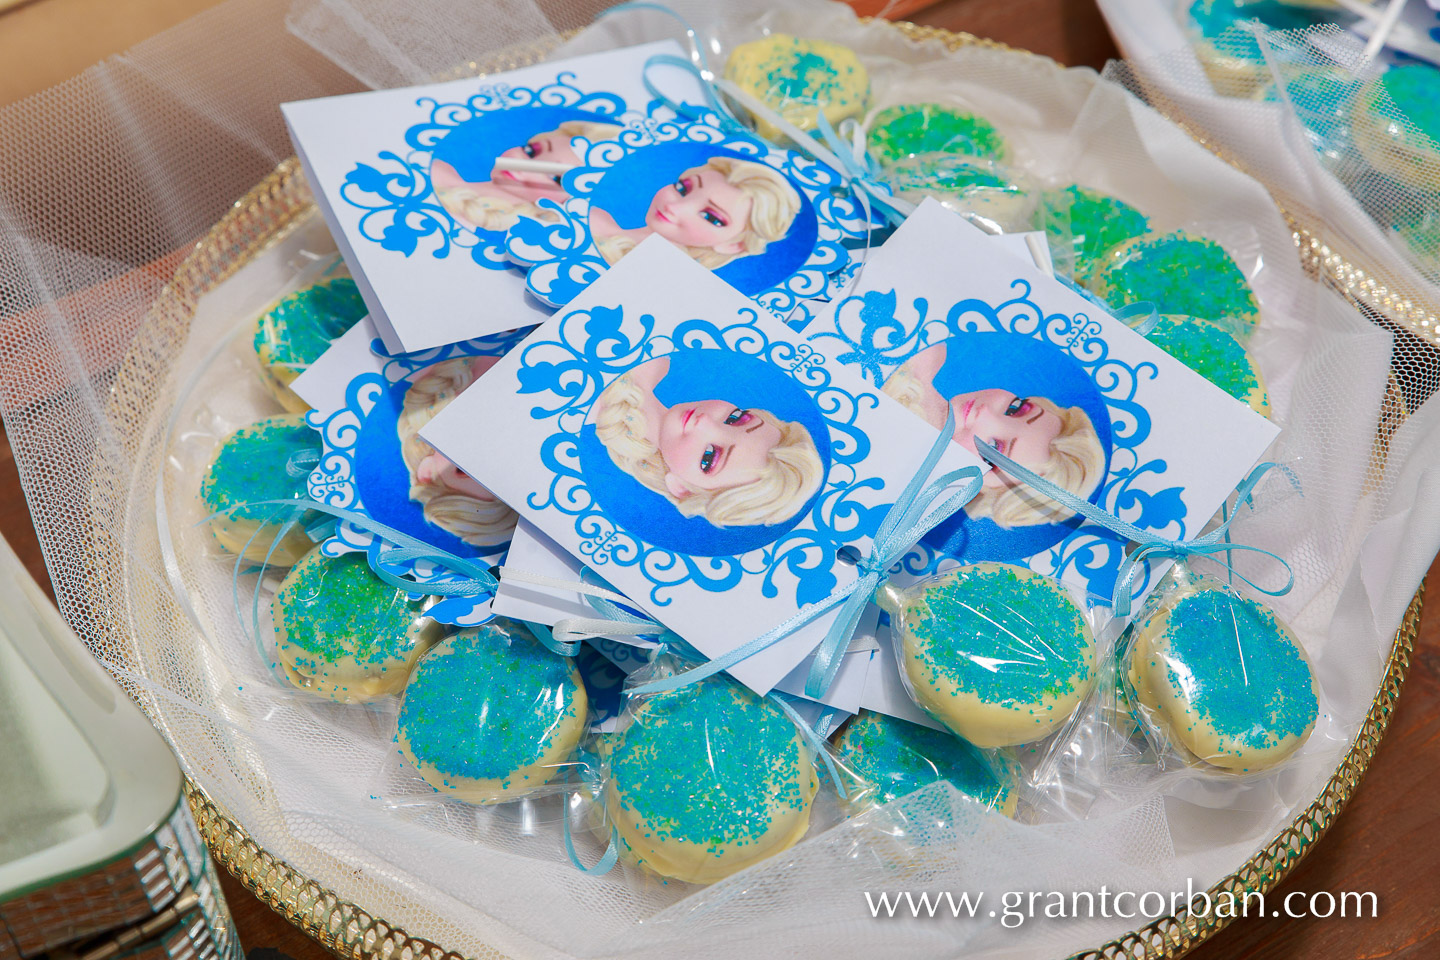 details of Frozen themed childrens birthday party